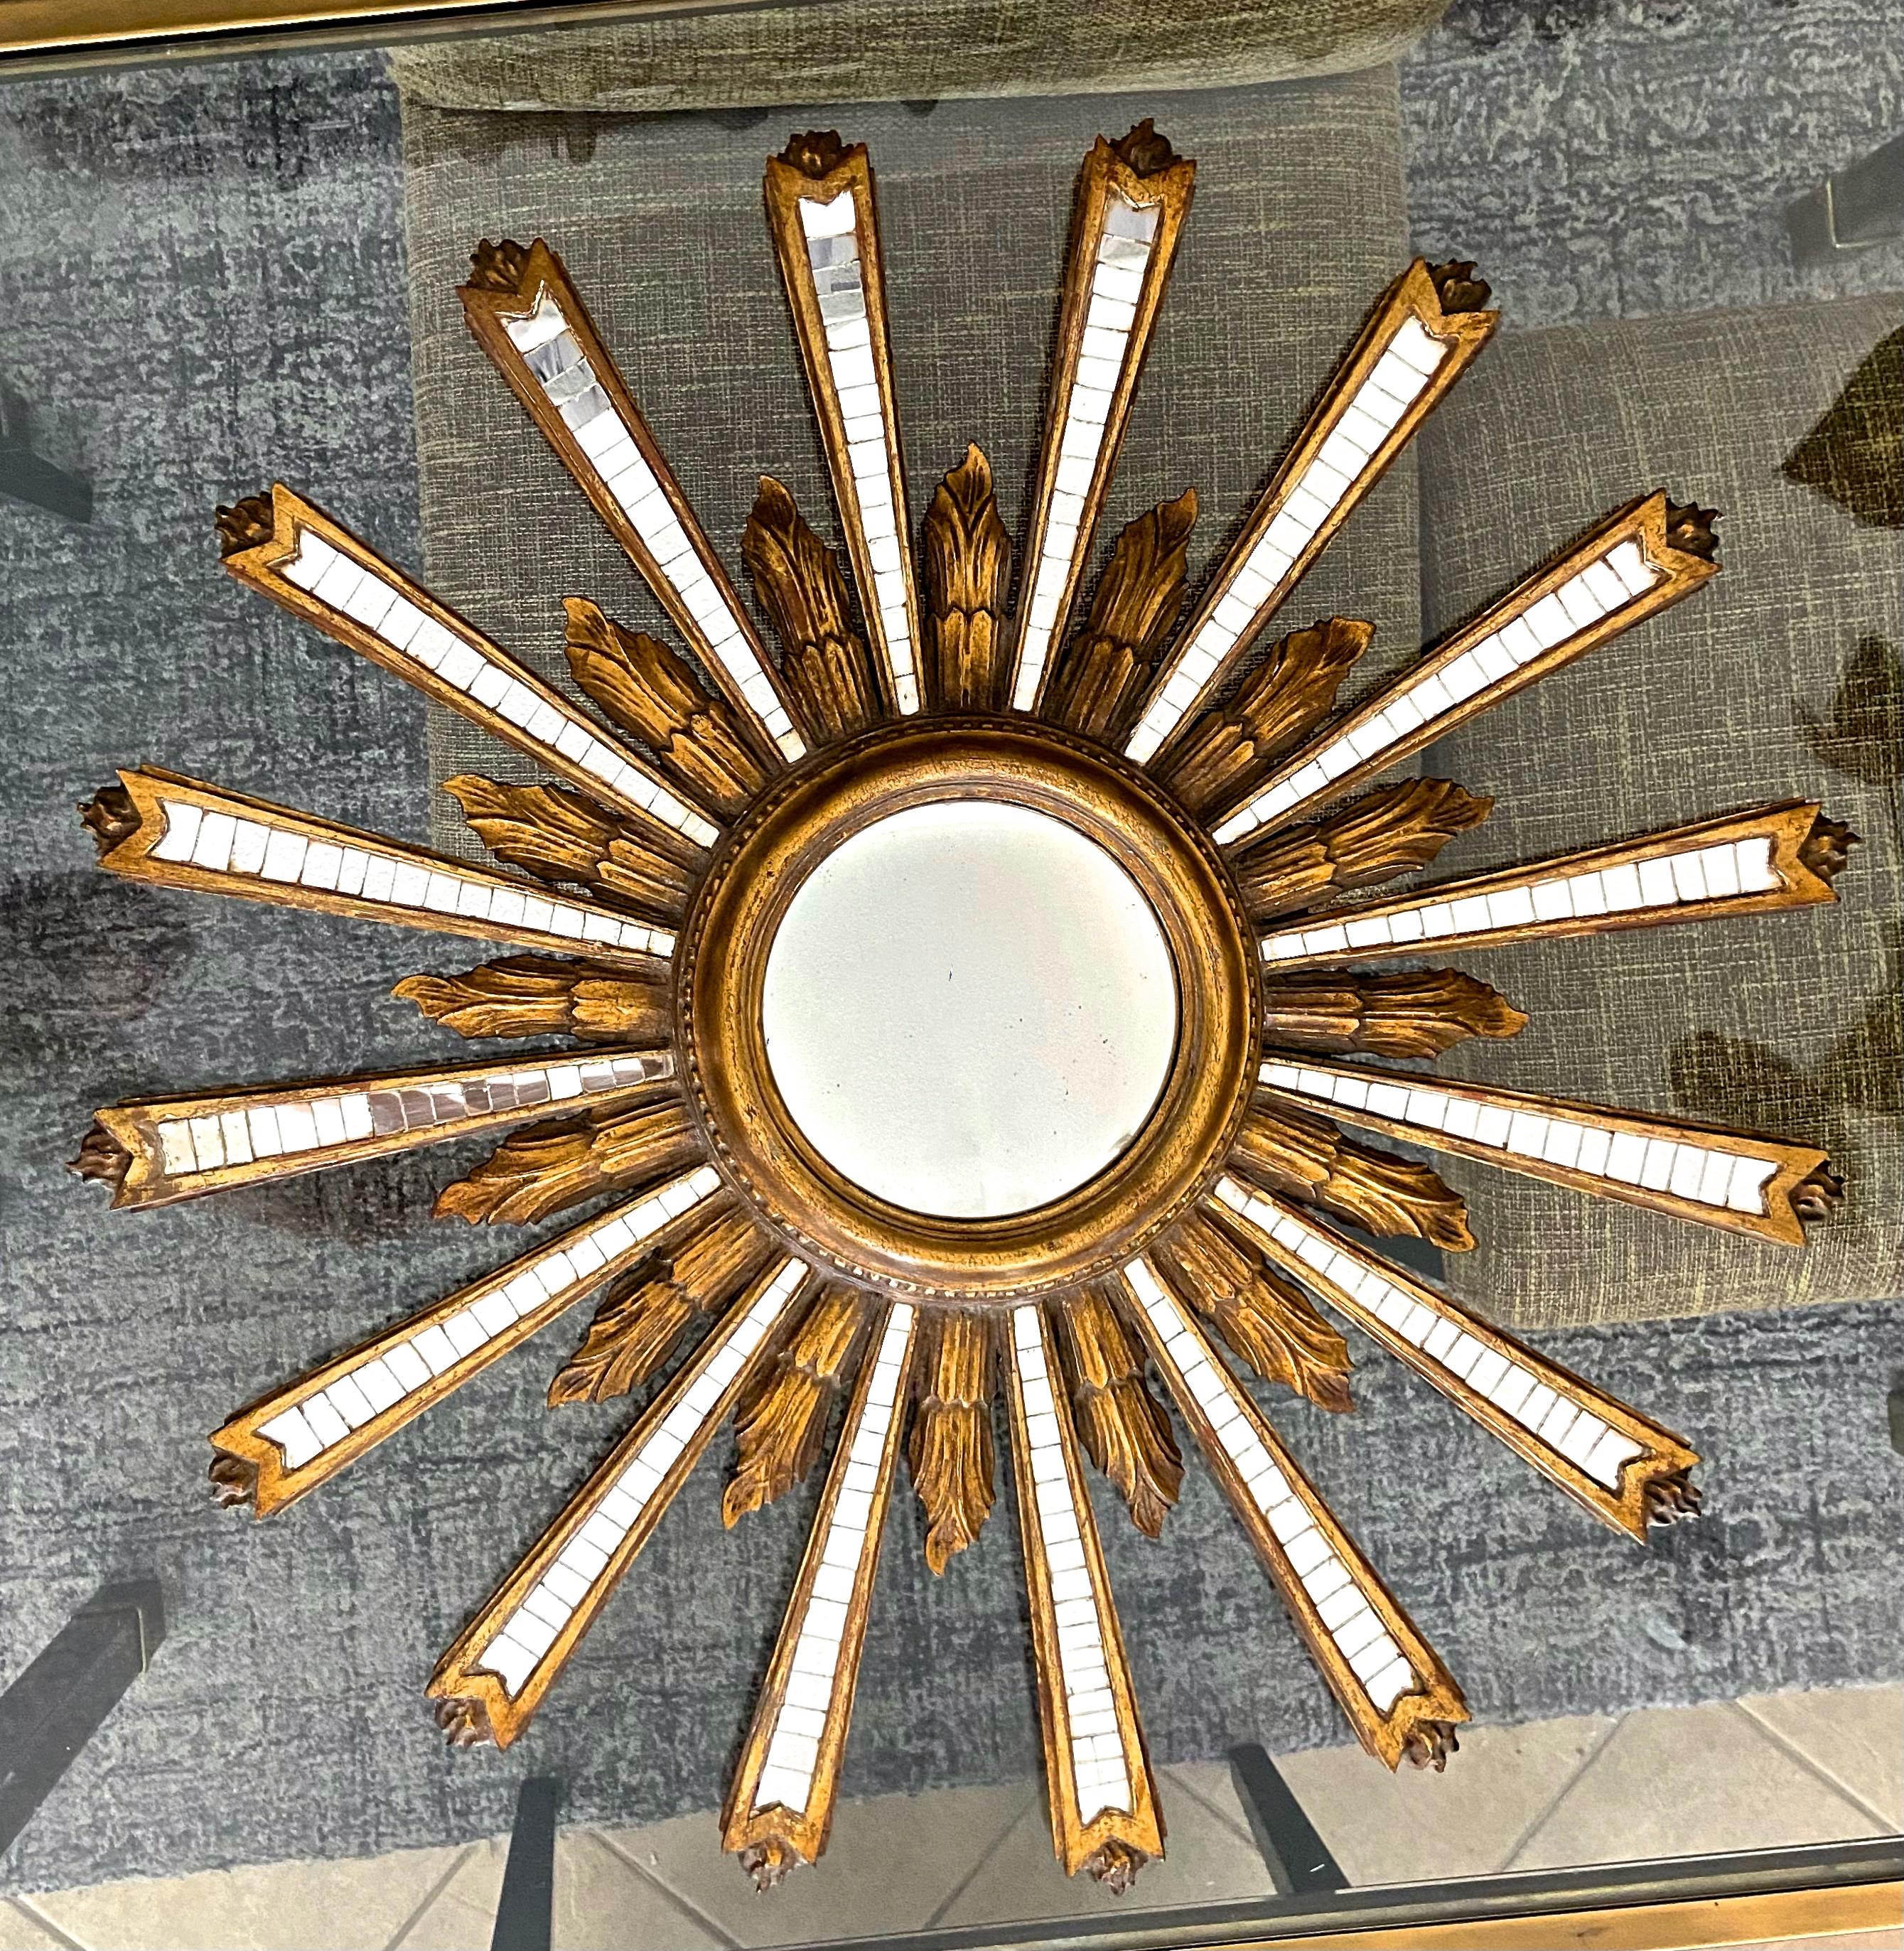 Large Italian hand carved gilt wood and gesso sunburst or starburst wall mirror with convex bulls eye center mirror. The round shaped mirror also features small inset pieces of mirror in each of the larger ray arms. The sunburst theme also includes